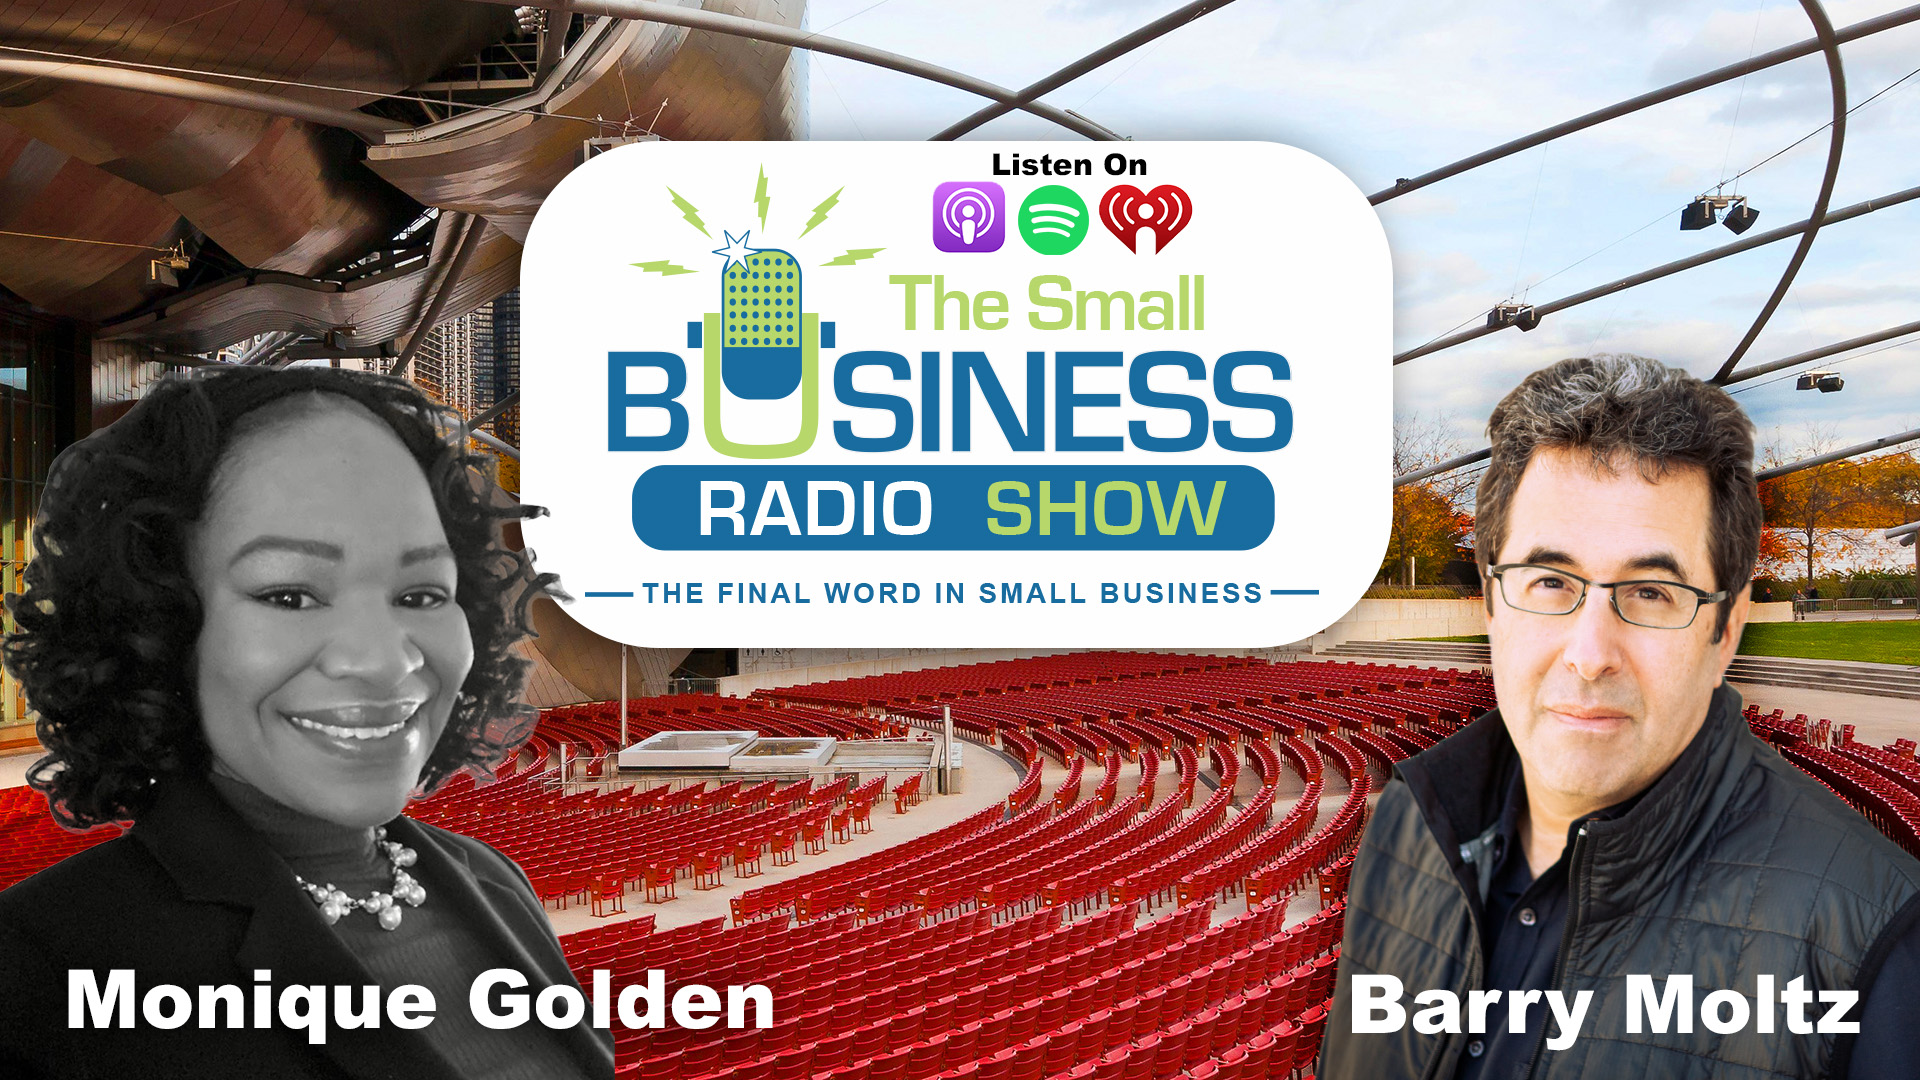 Monique Golden on The Small Business Radio Show